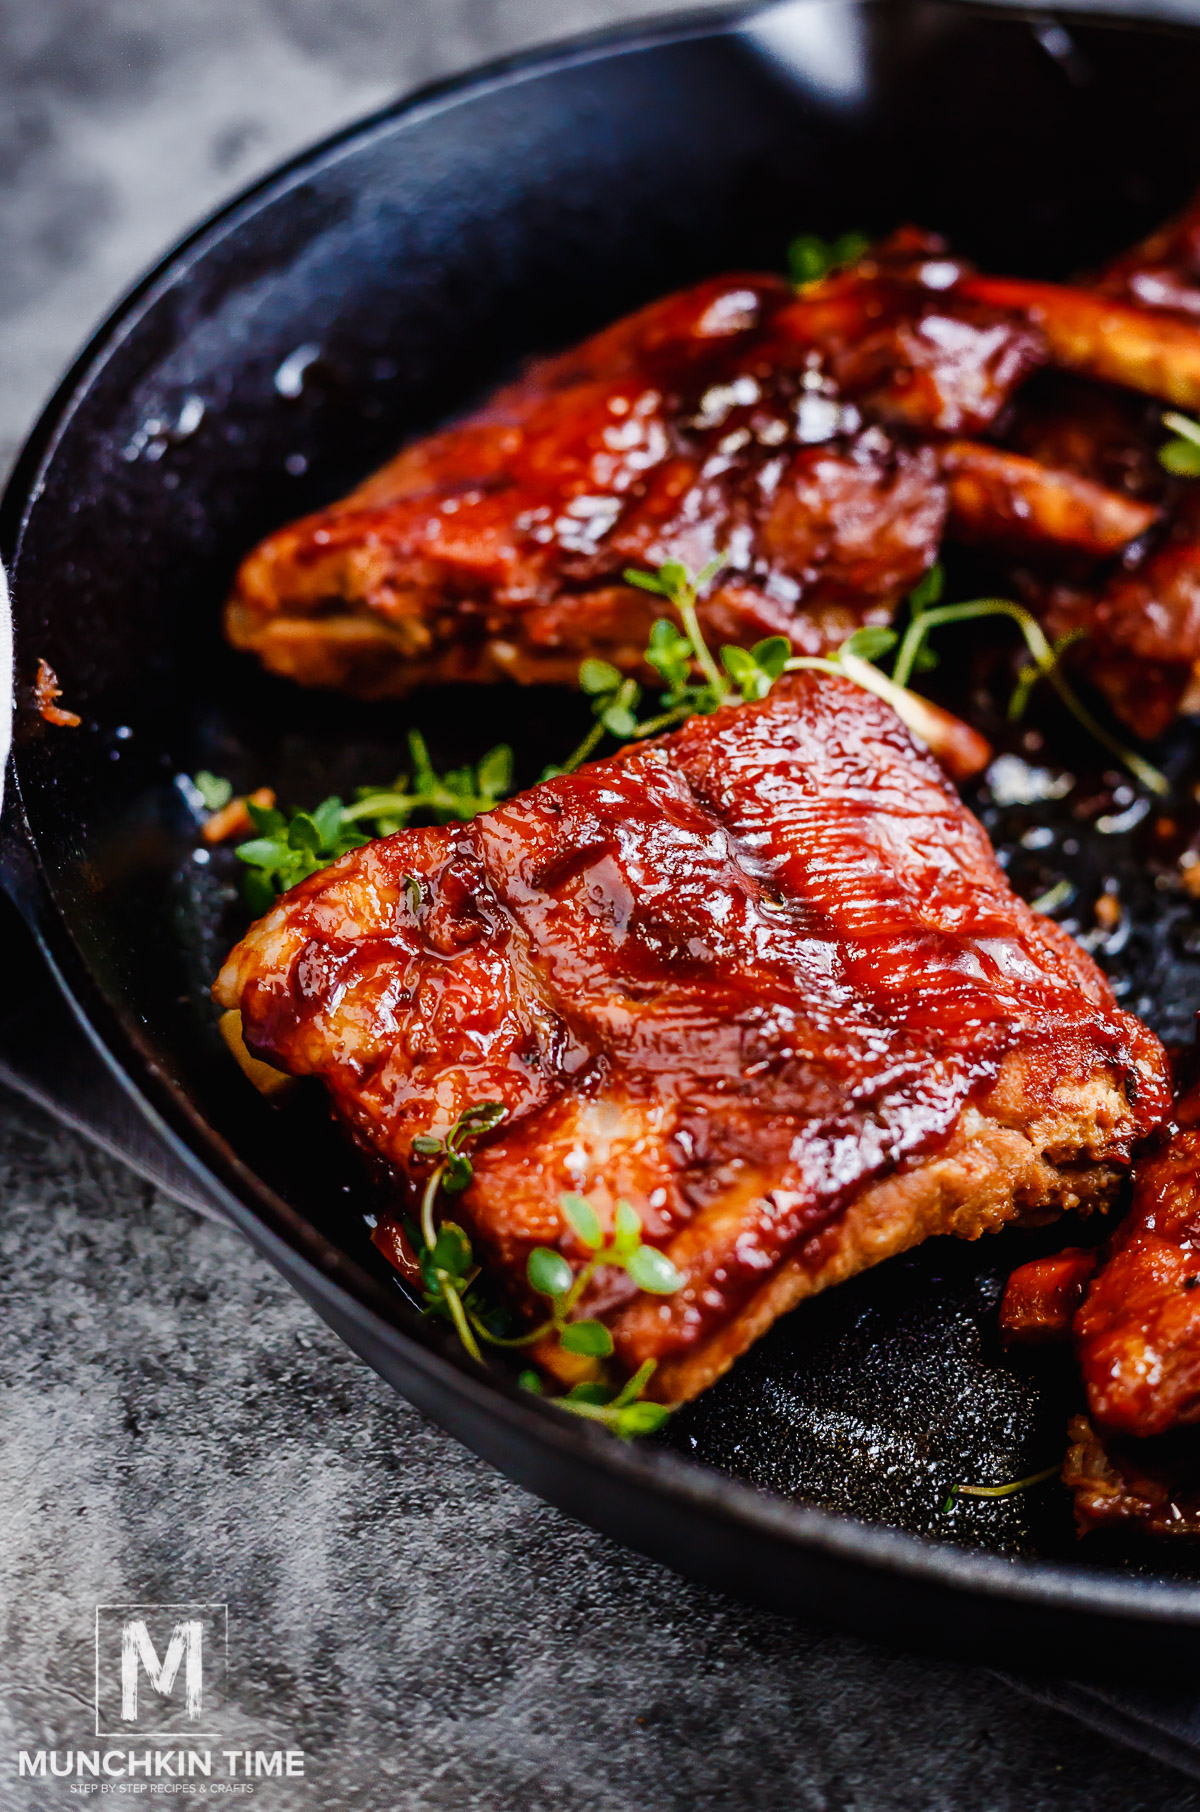 Incredibly juice & fall-off-the-bone baby back ribs braised in amazing liquid inside Instant Pot.